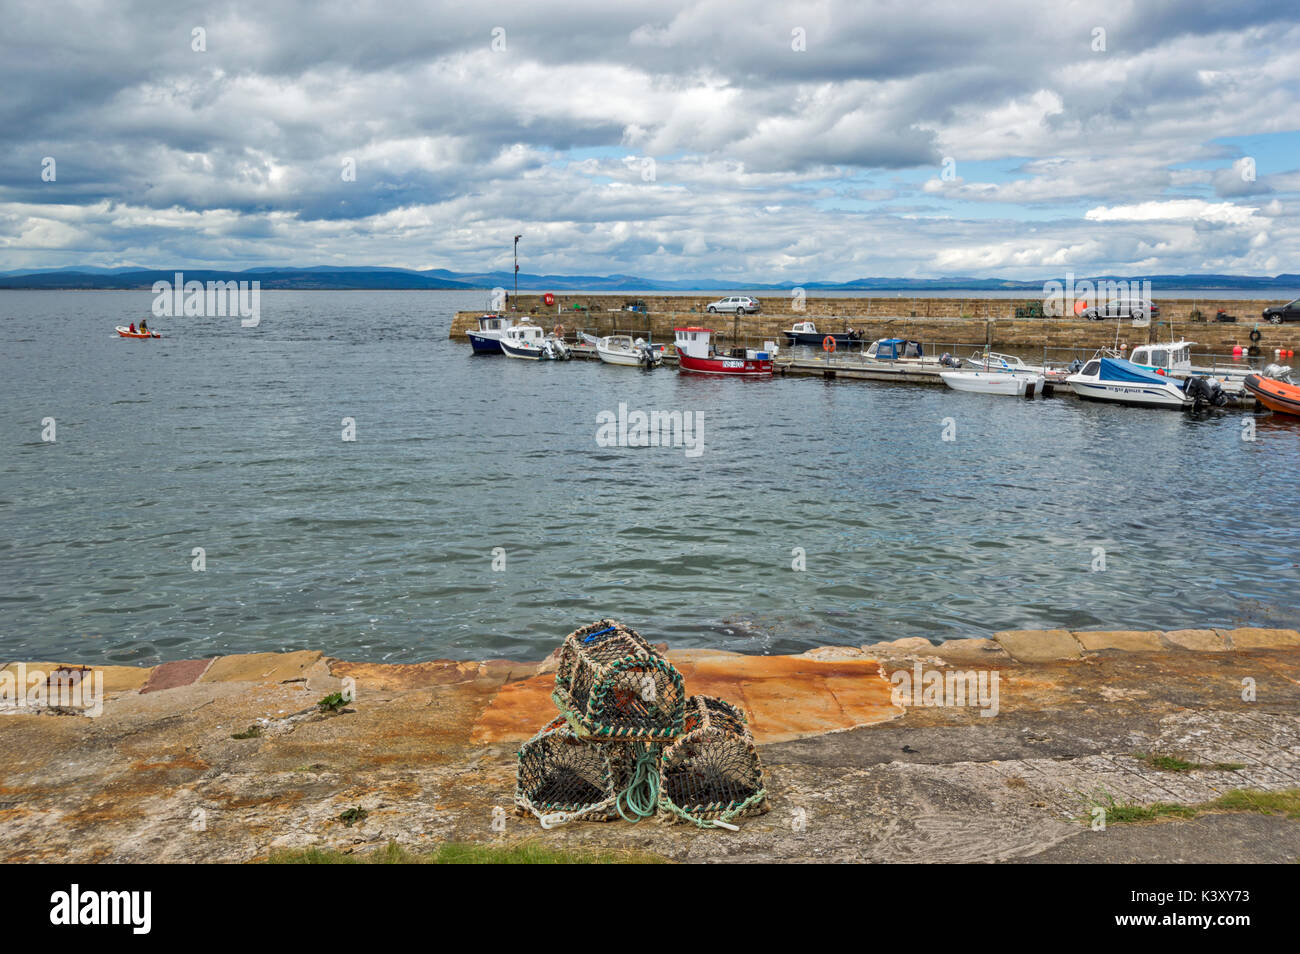 PORTMAHOMACK VILLAGE EASTER ROSS TARBAT PENINSULA THE HARBOUR AND JETTY WITH LOBSTER OR CRAB CREELS Stock Photo